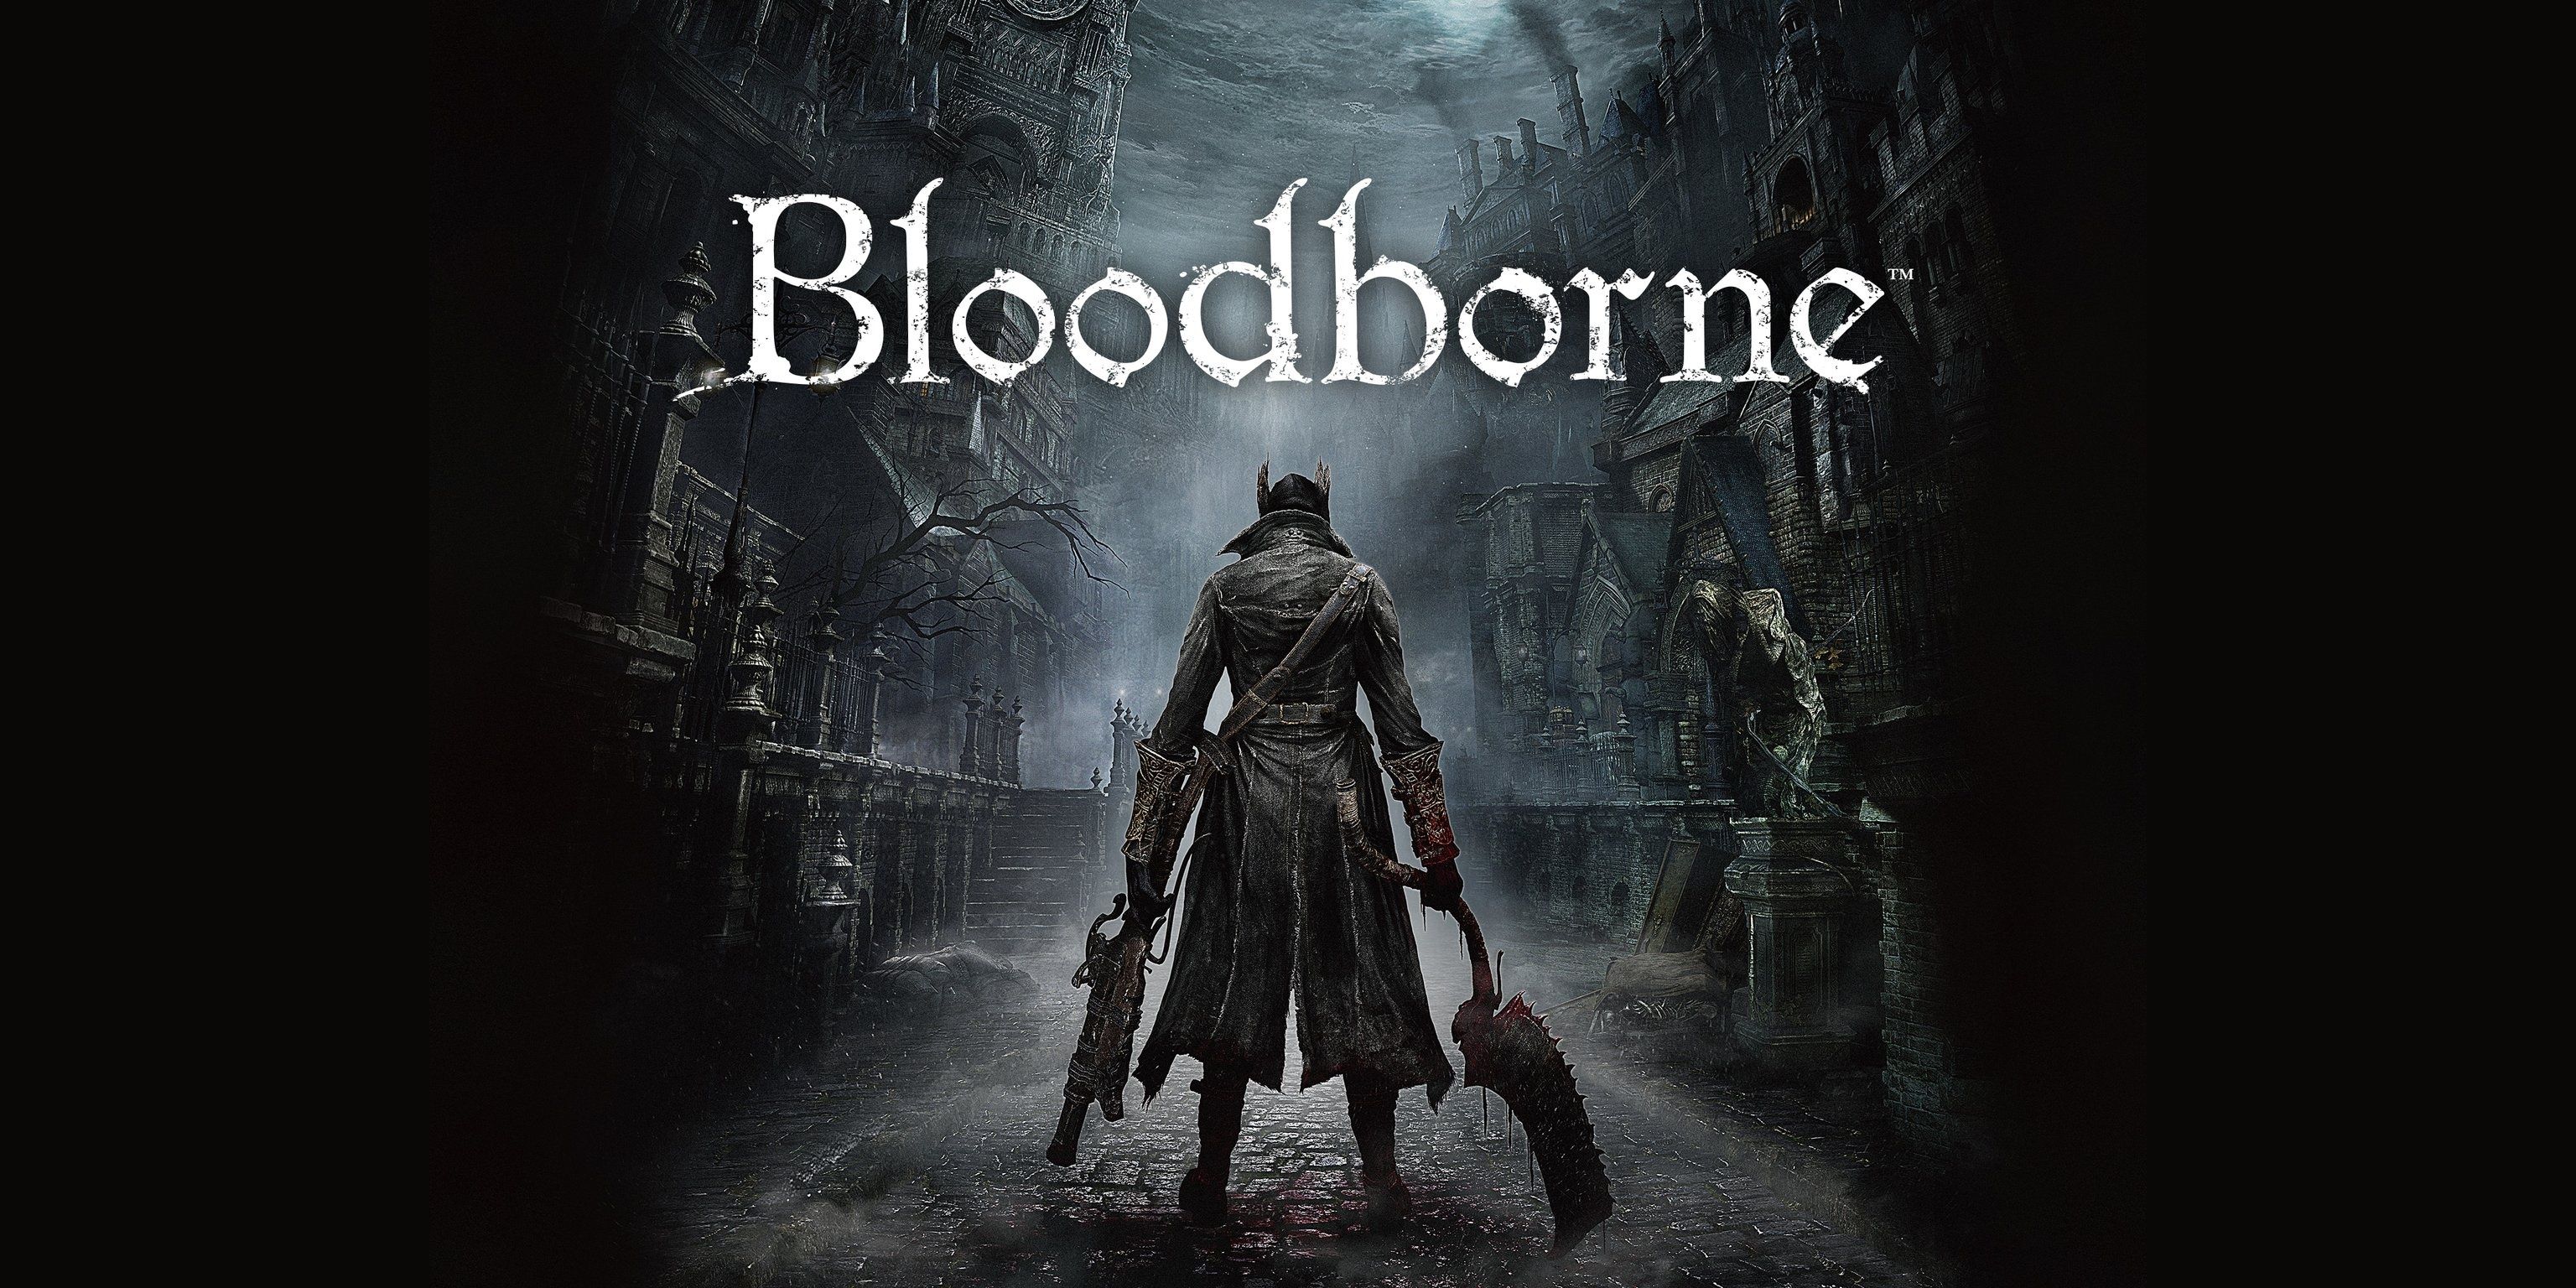 Bloodborne key art showing the Hunter on a dark street facing away from the viewer